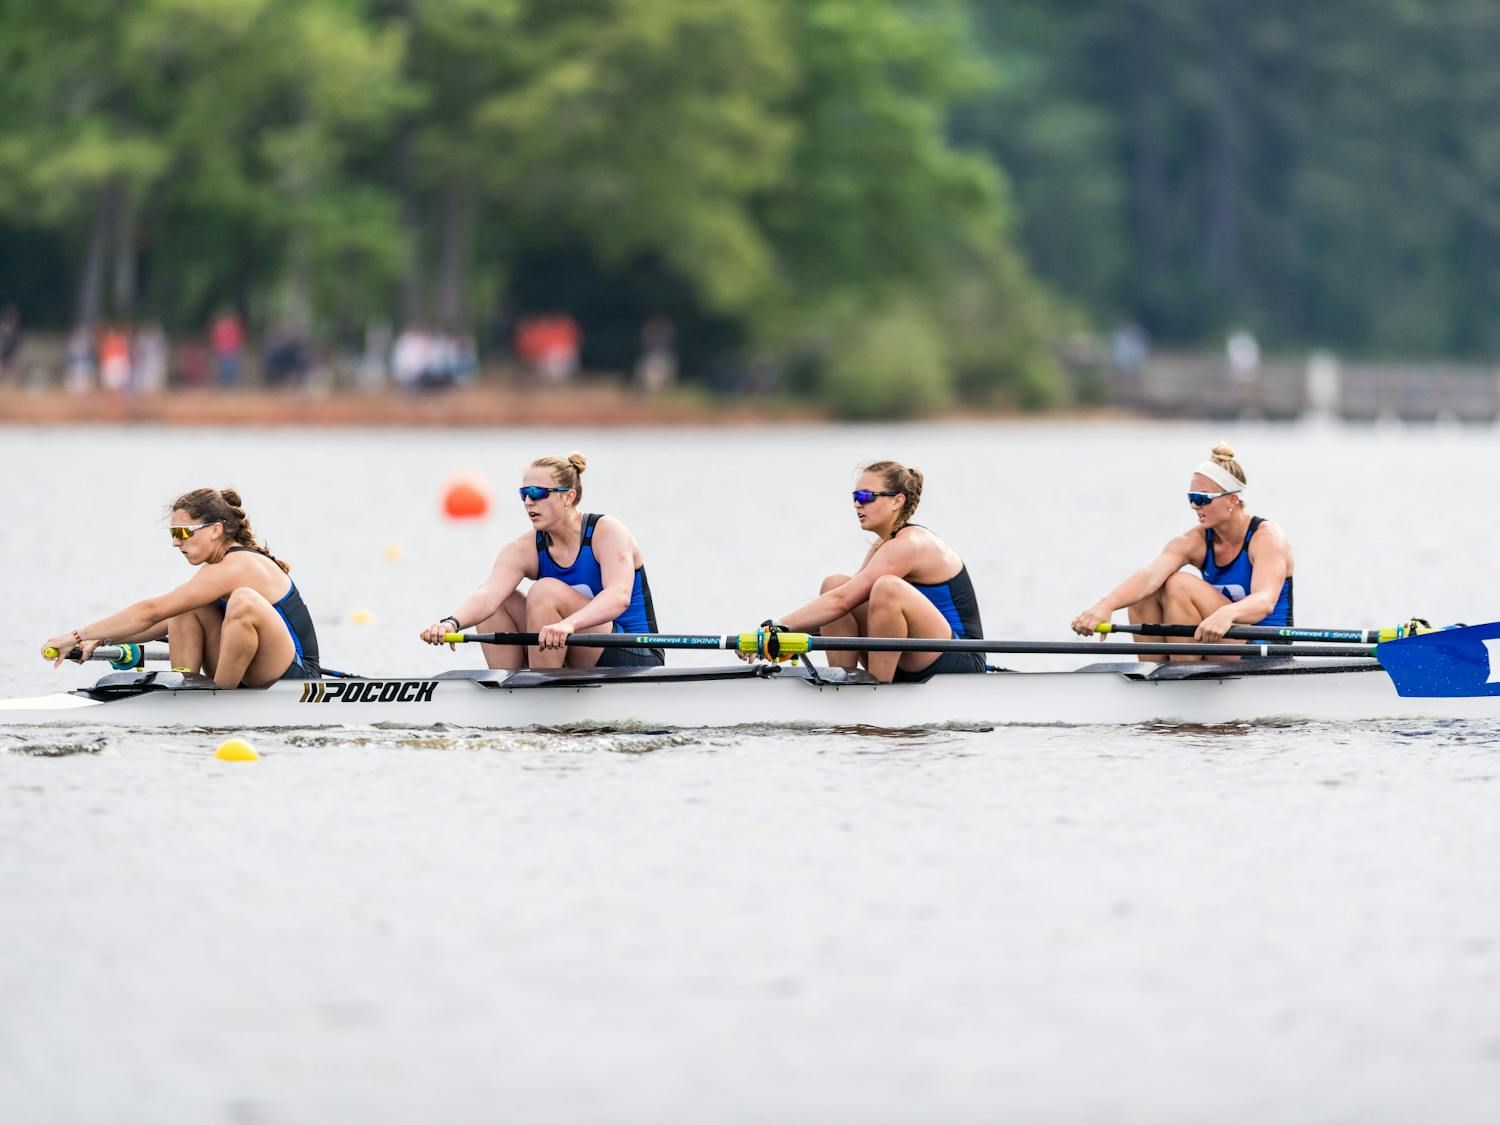 Duke's rowing team took home the Pocock Cup with a total of 88 points.